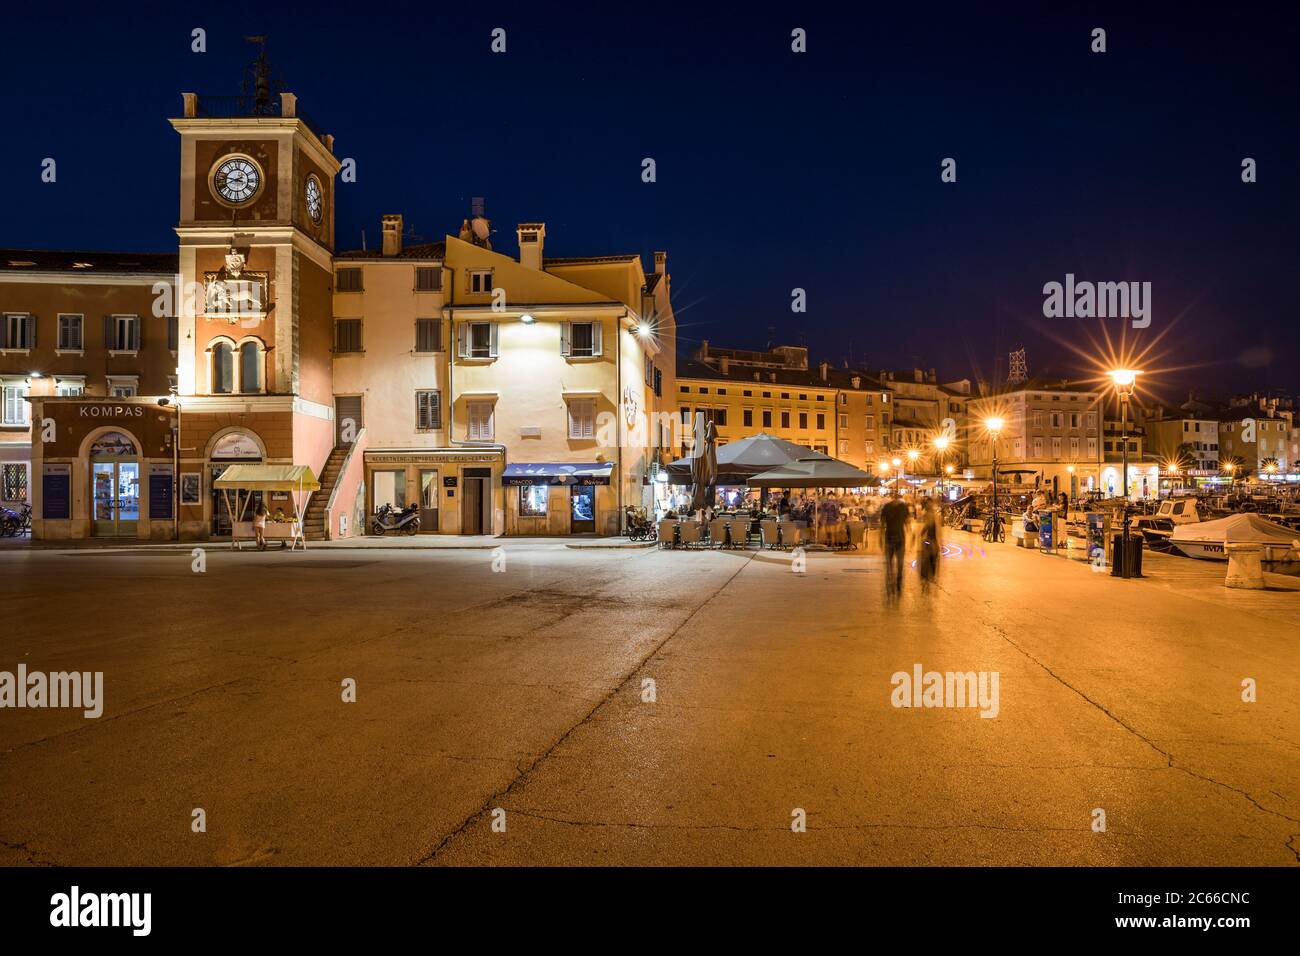 Marshal Tito Square with clock tower in the evening, Old Town, Rovinj, Istria, Croatia Stock Photo